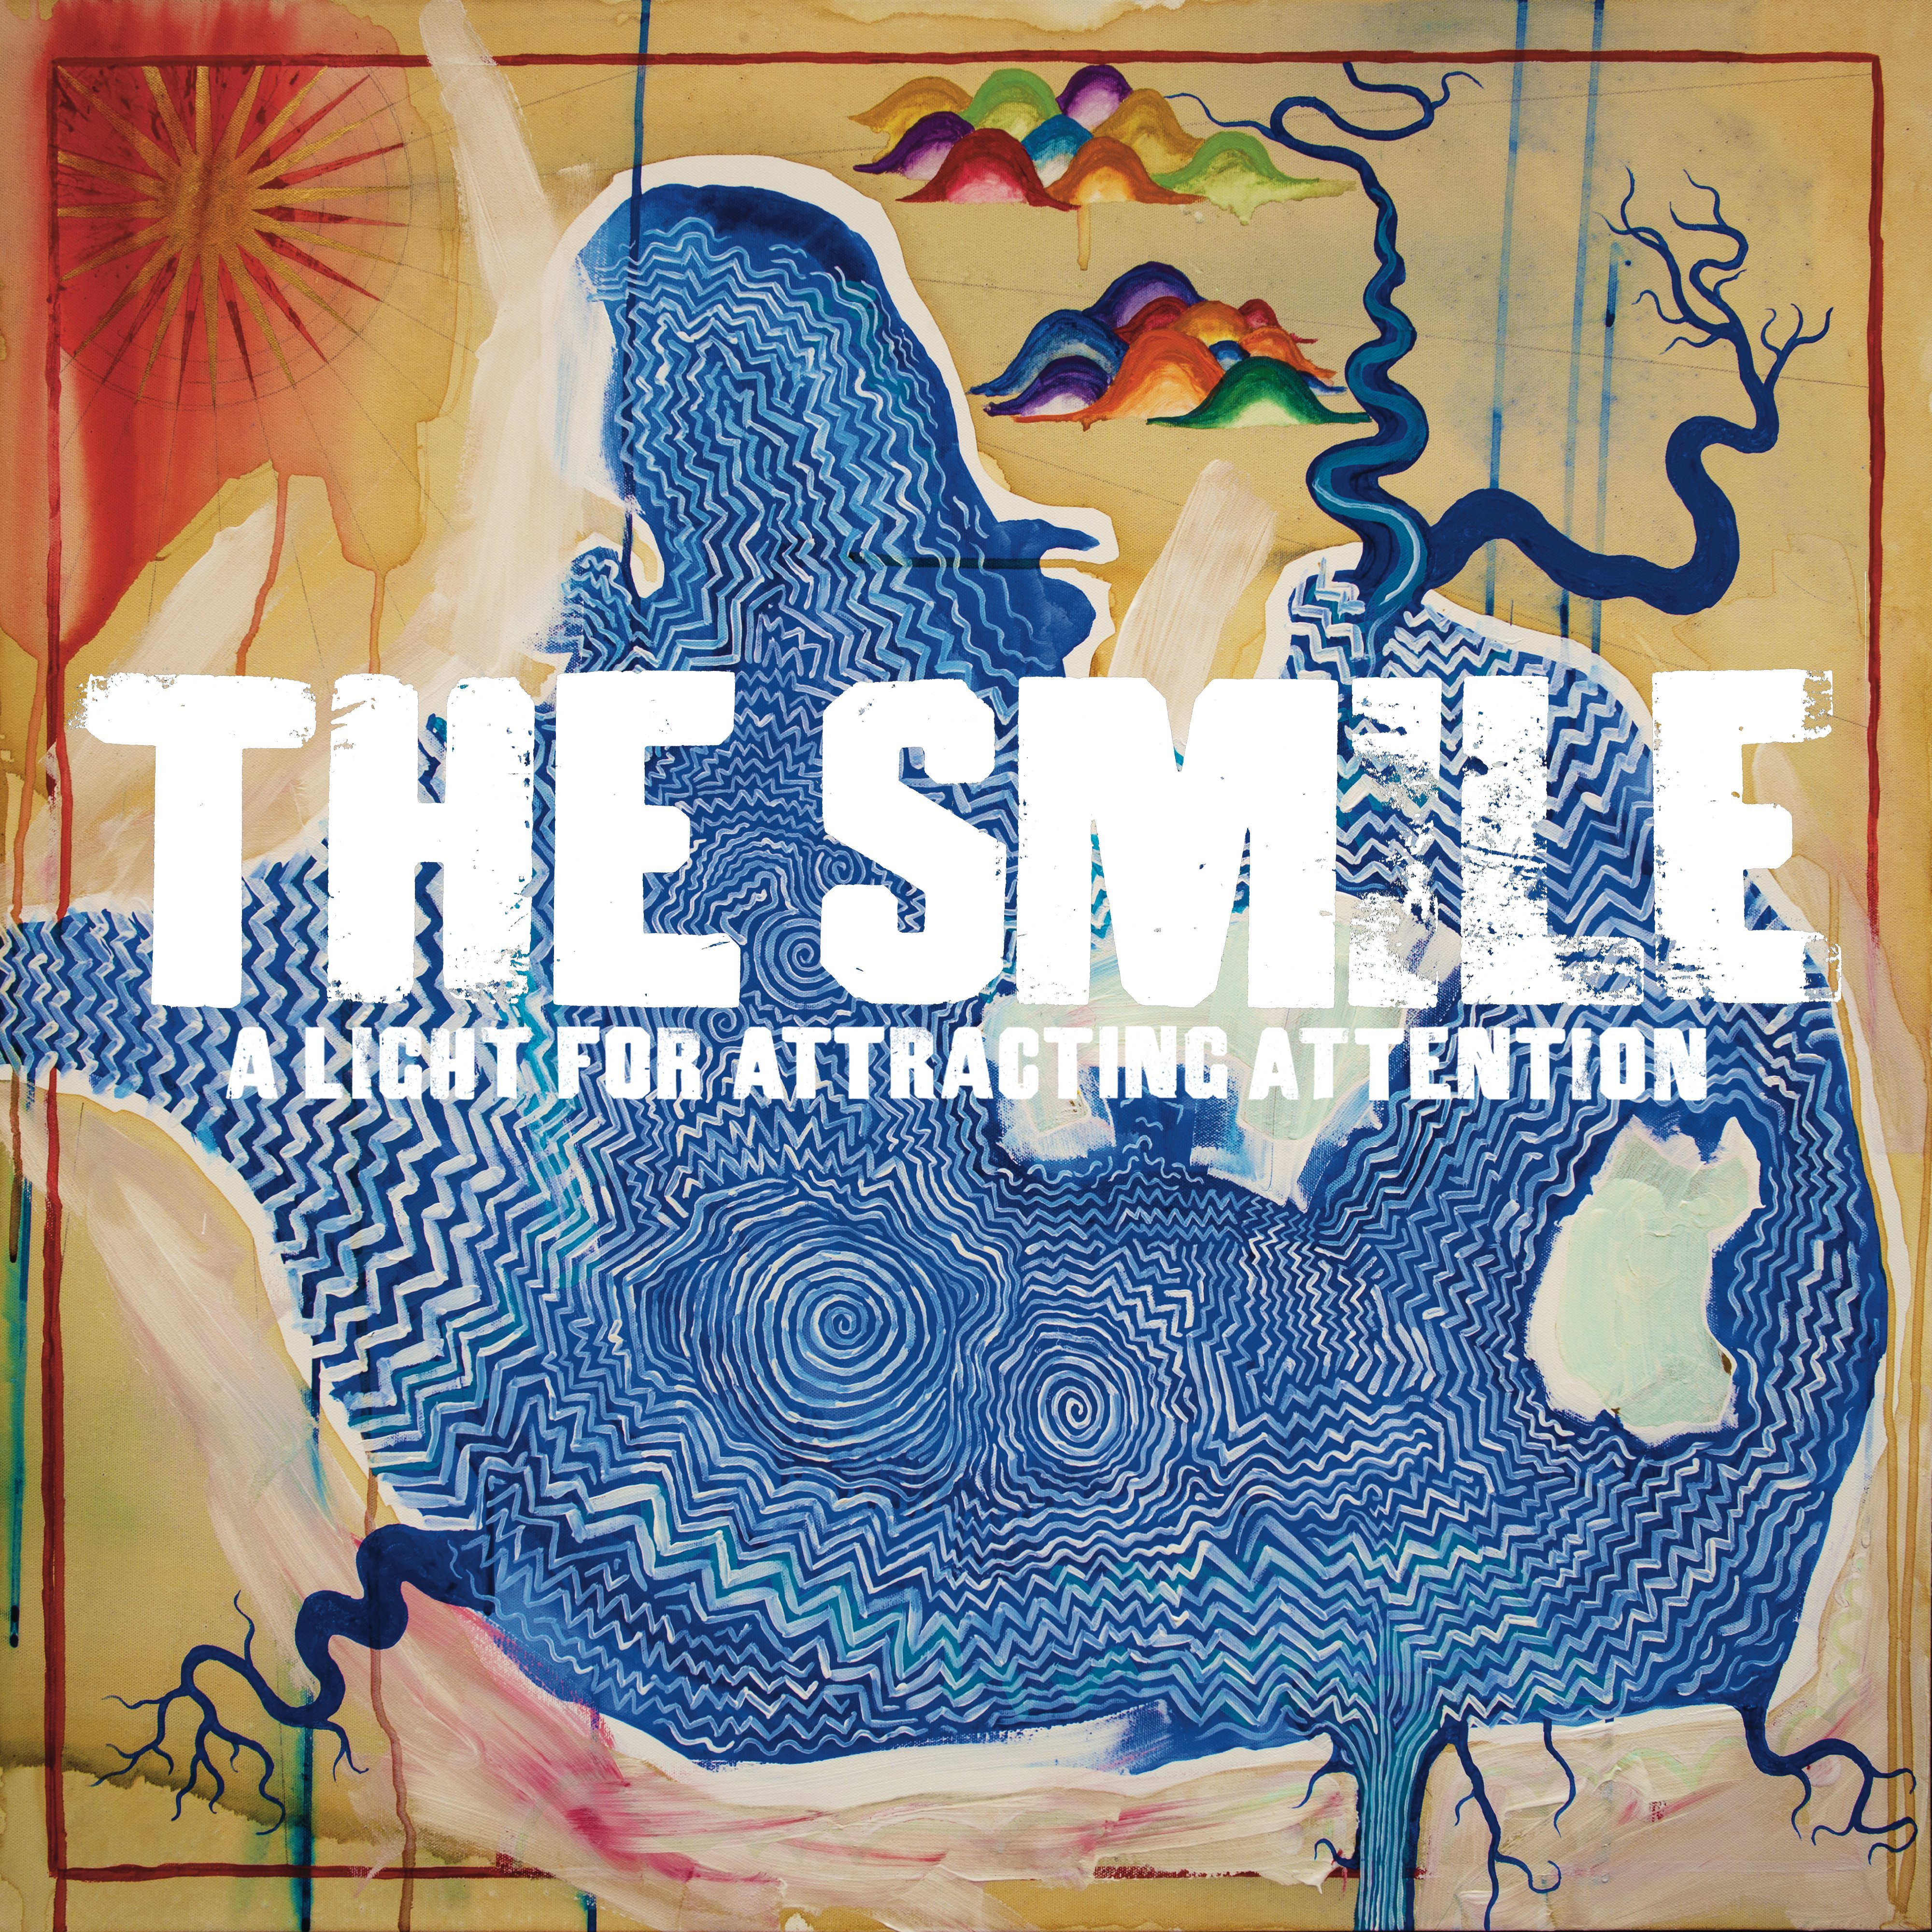 The Smile-A Light For Attracting Attention-(XL1196CD)-CD-FLAC-2022-HOUND